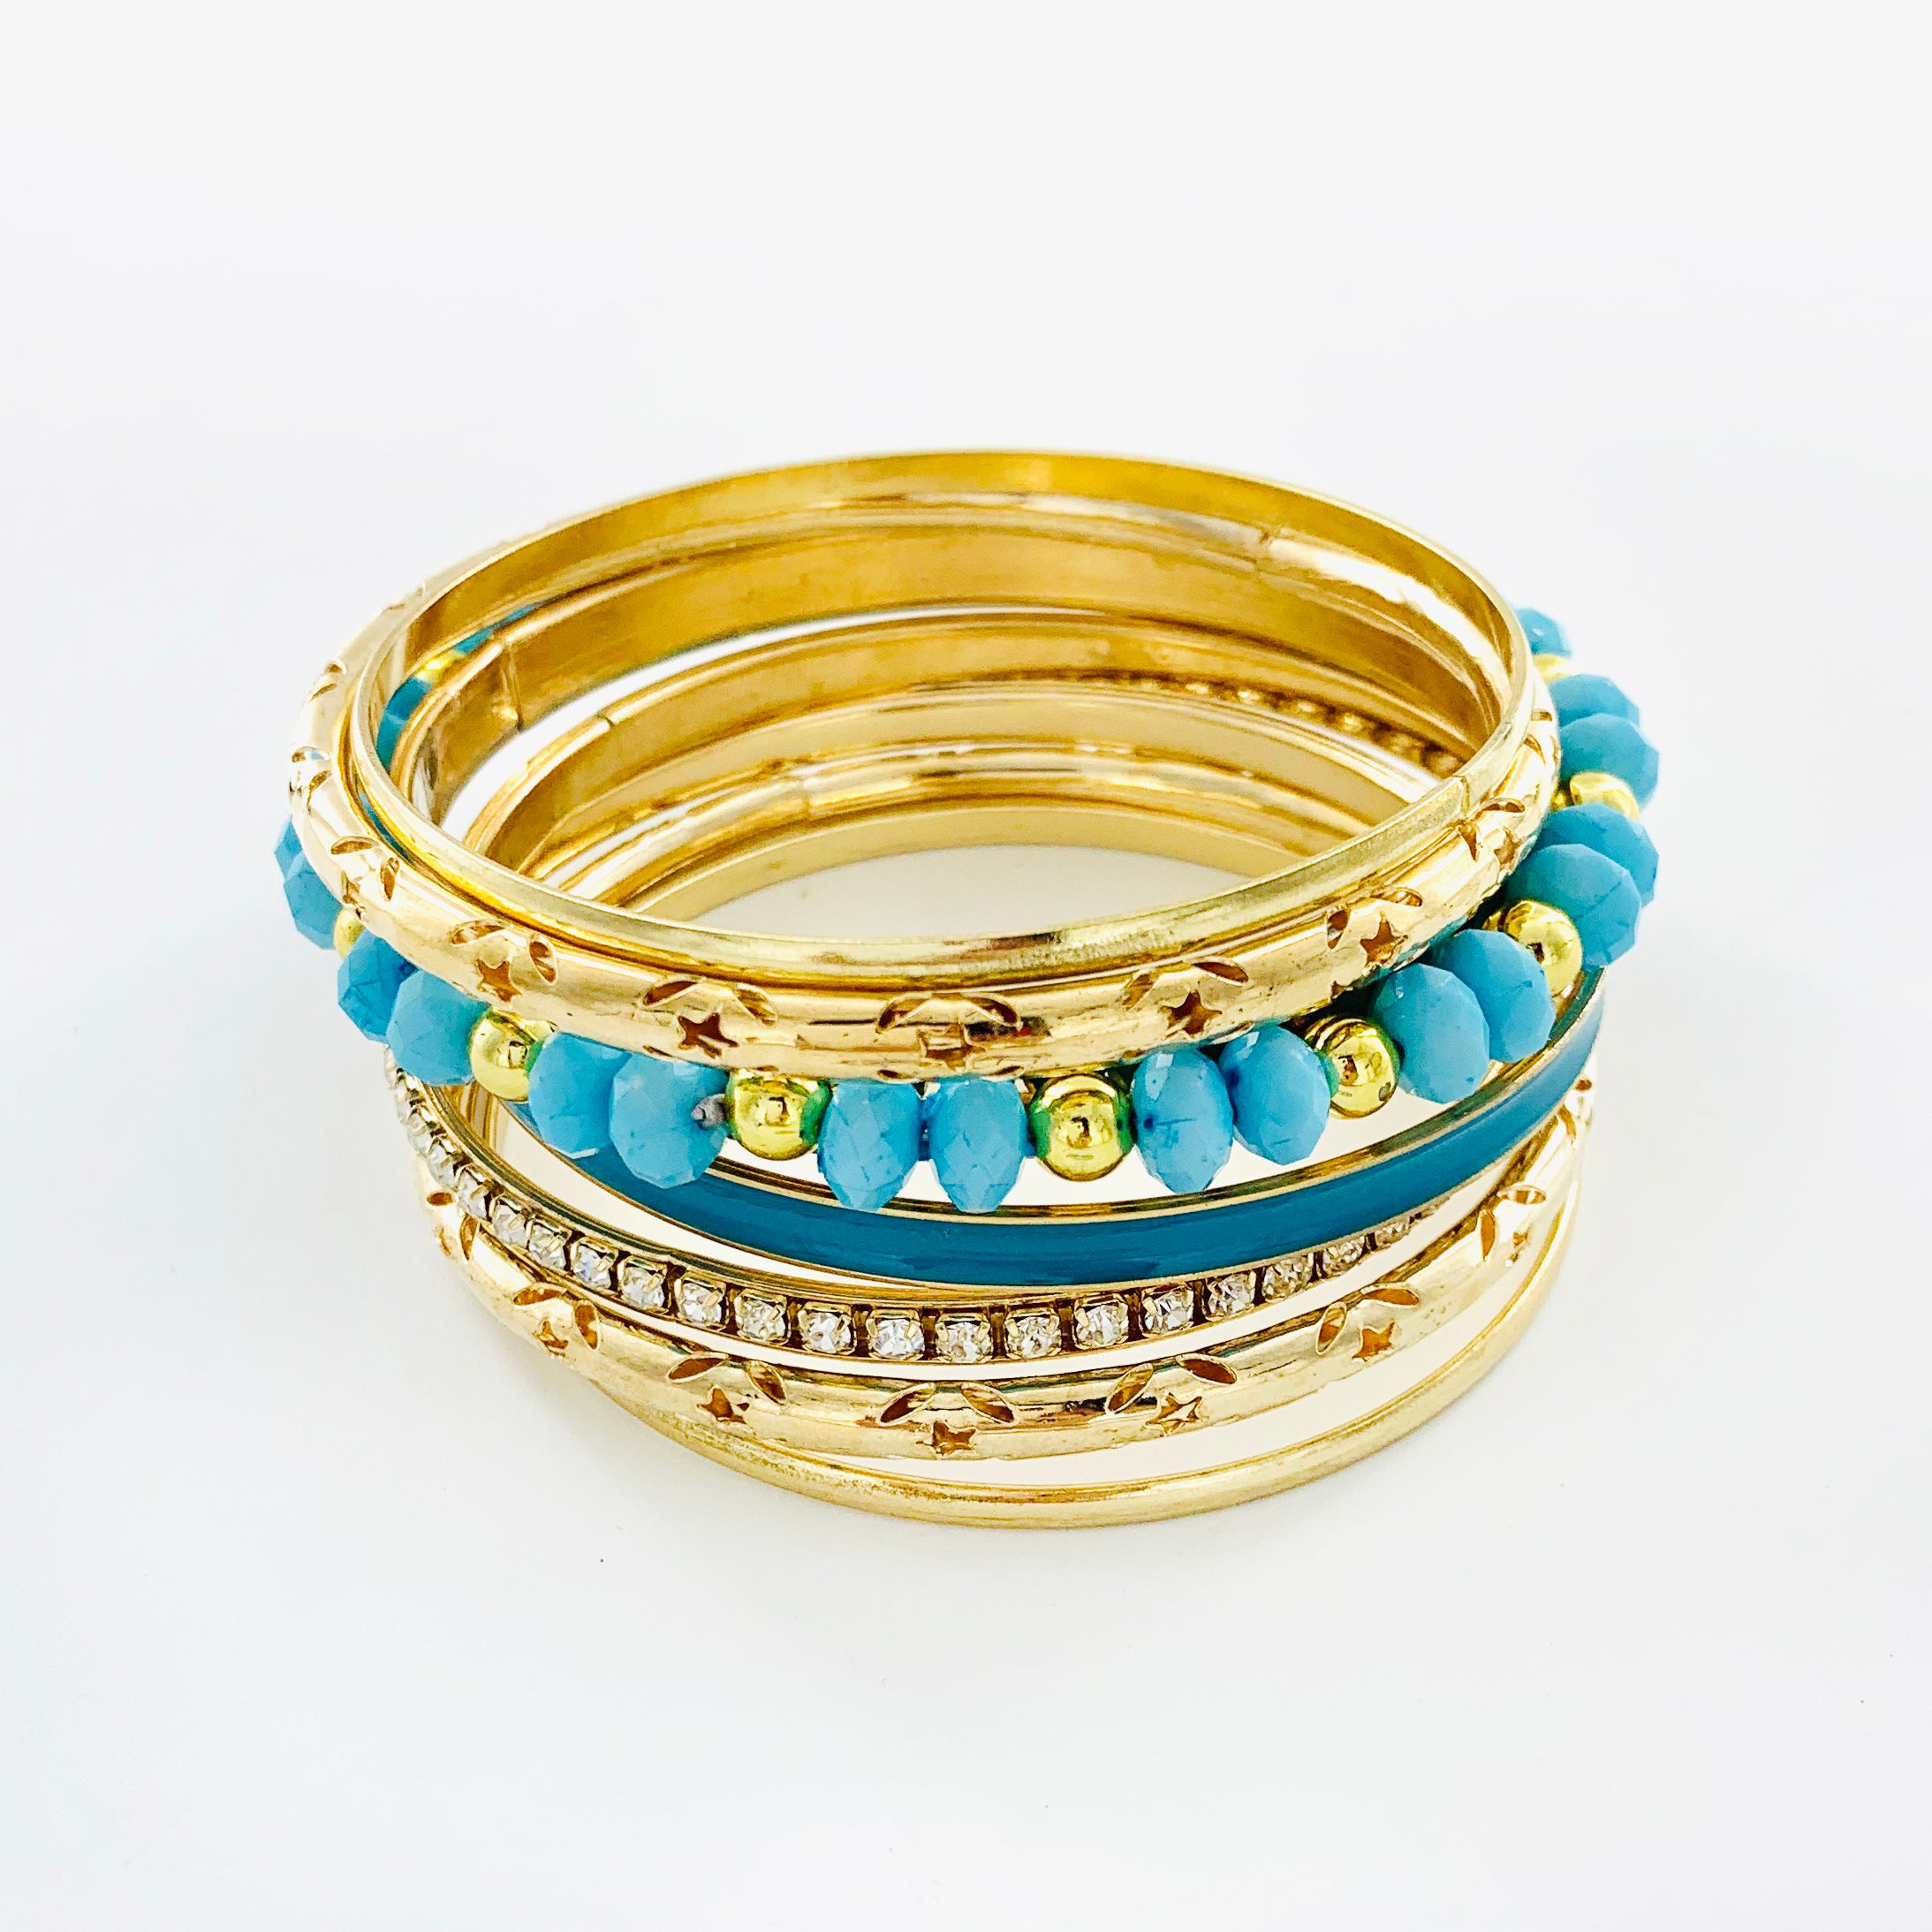 Gold Bangles with Blue beads and Diamante stones